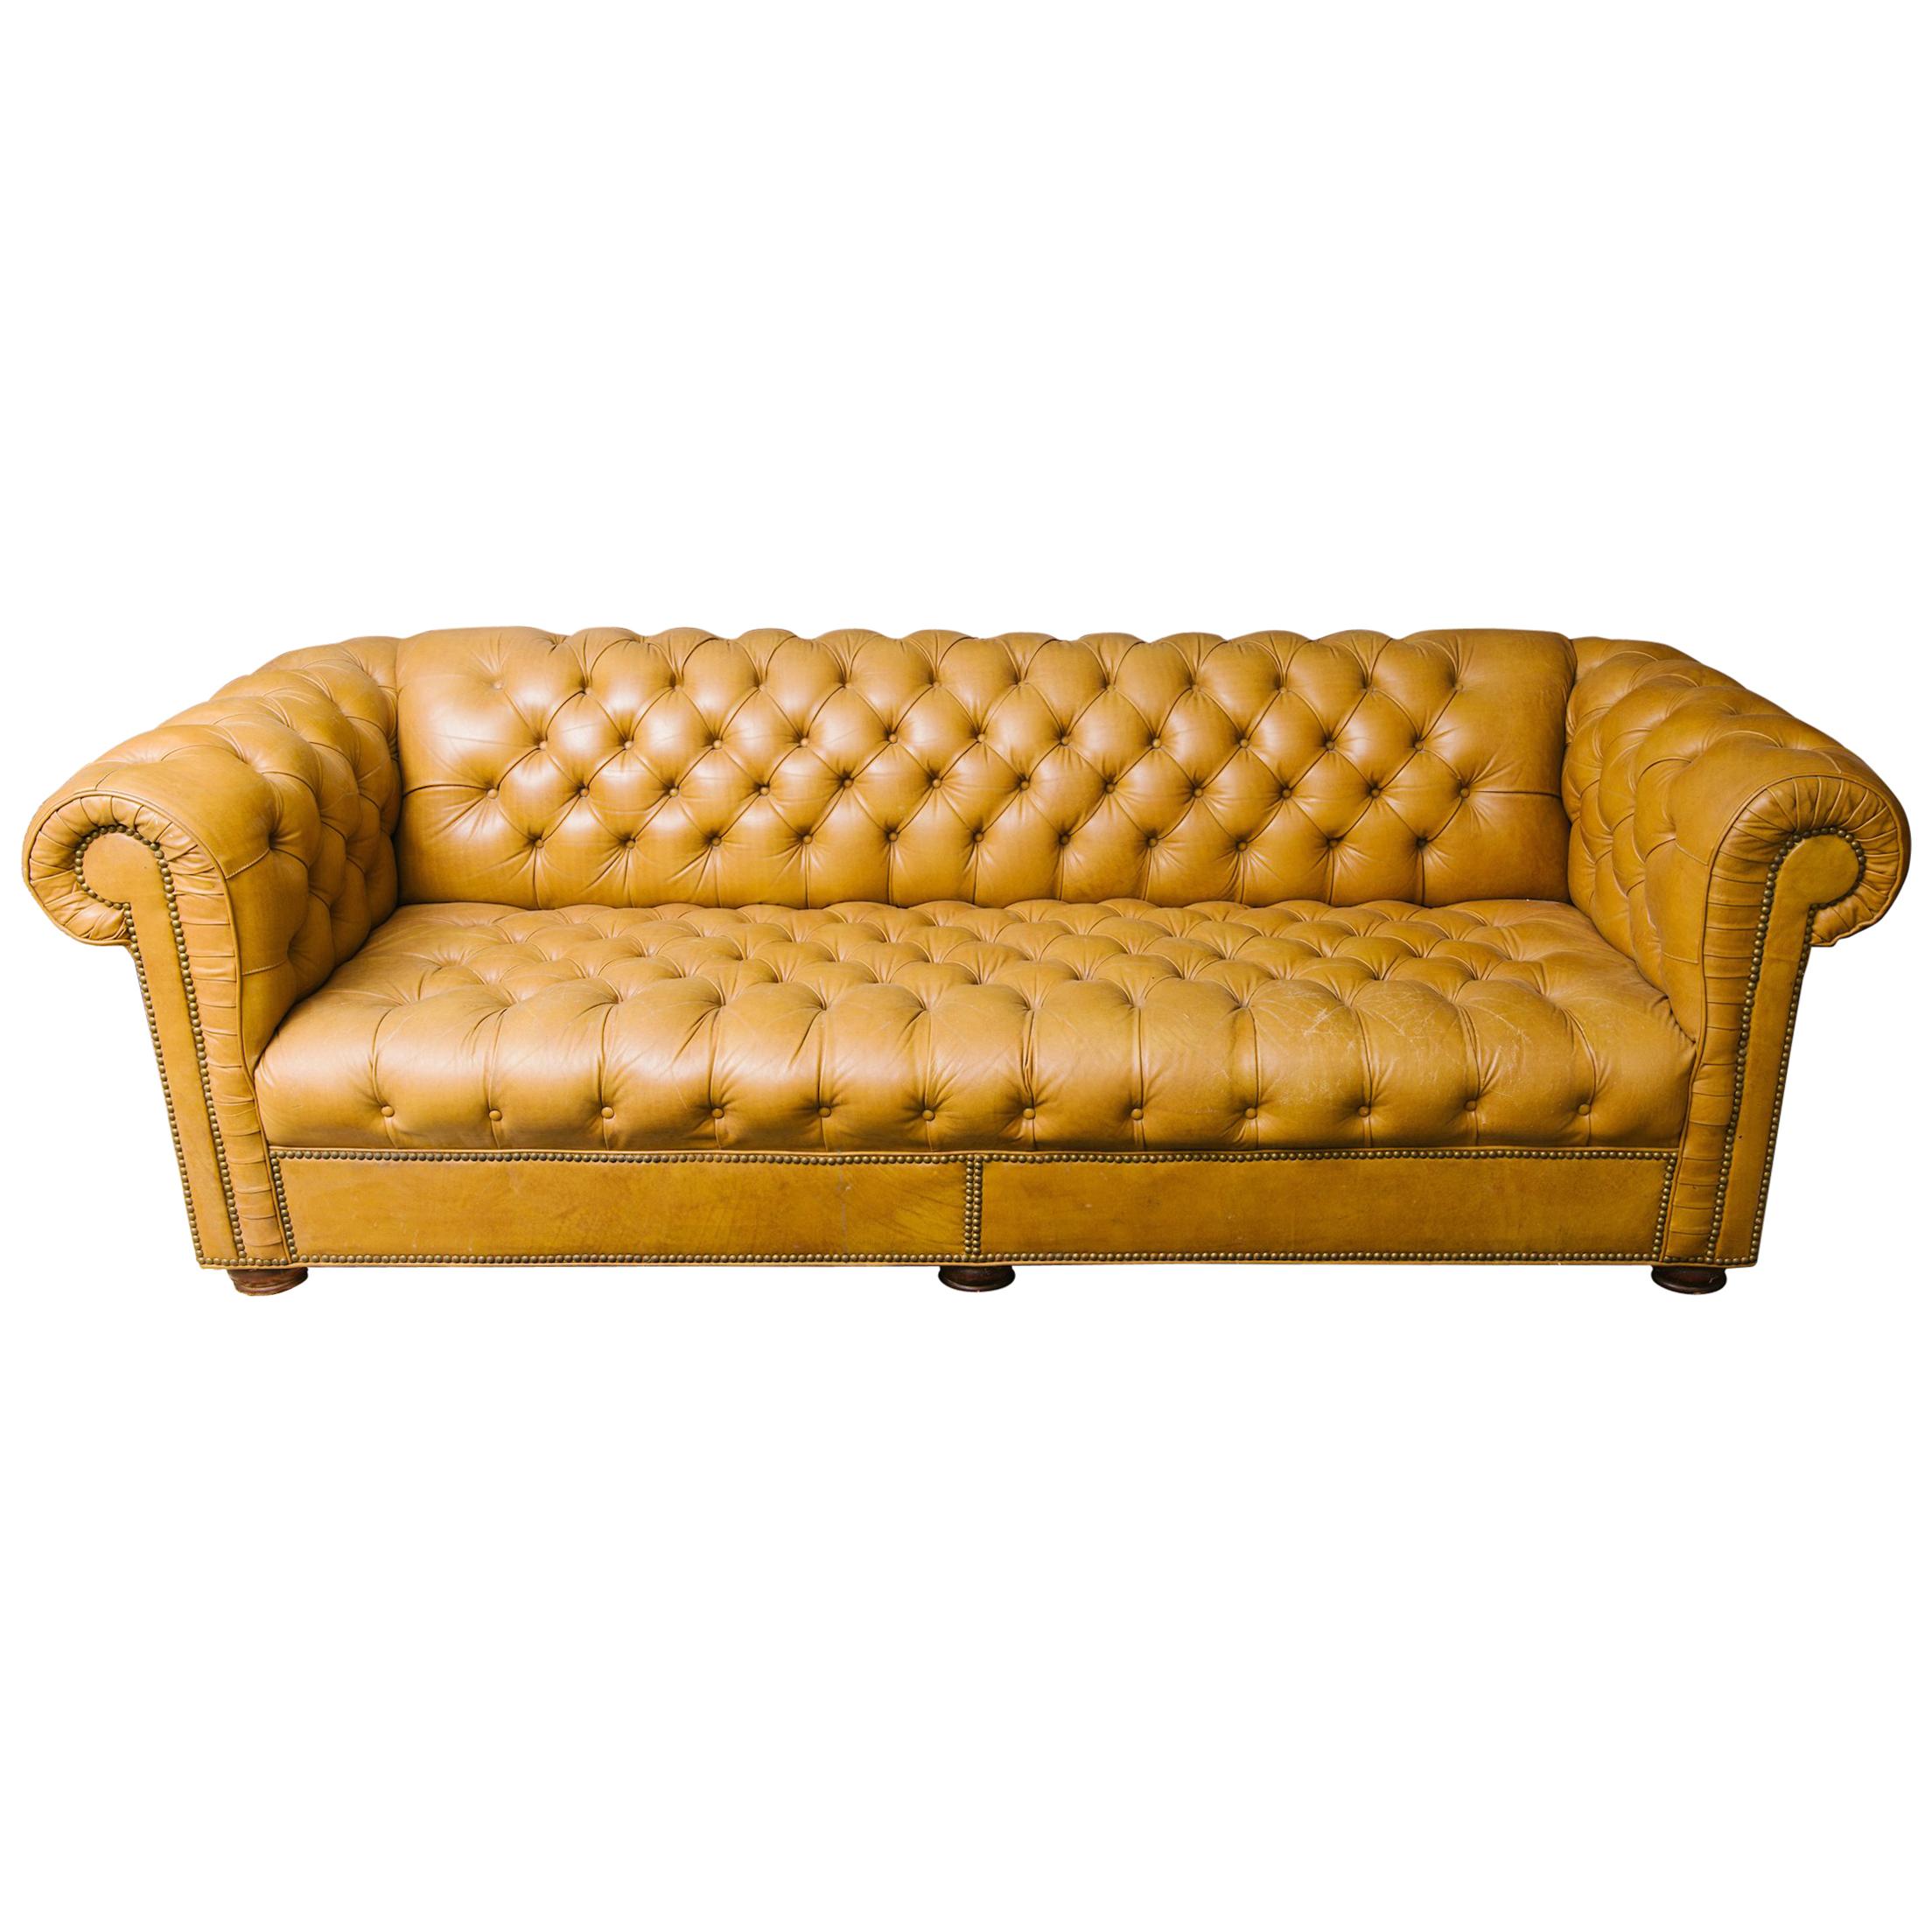 Leather Chesterfield Sofa with Brass Nailheads